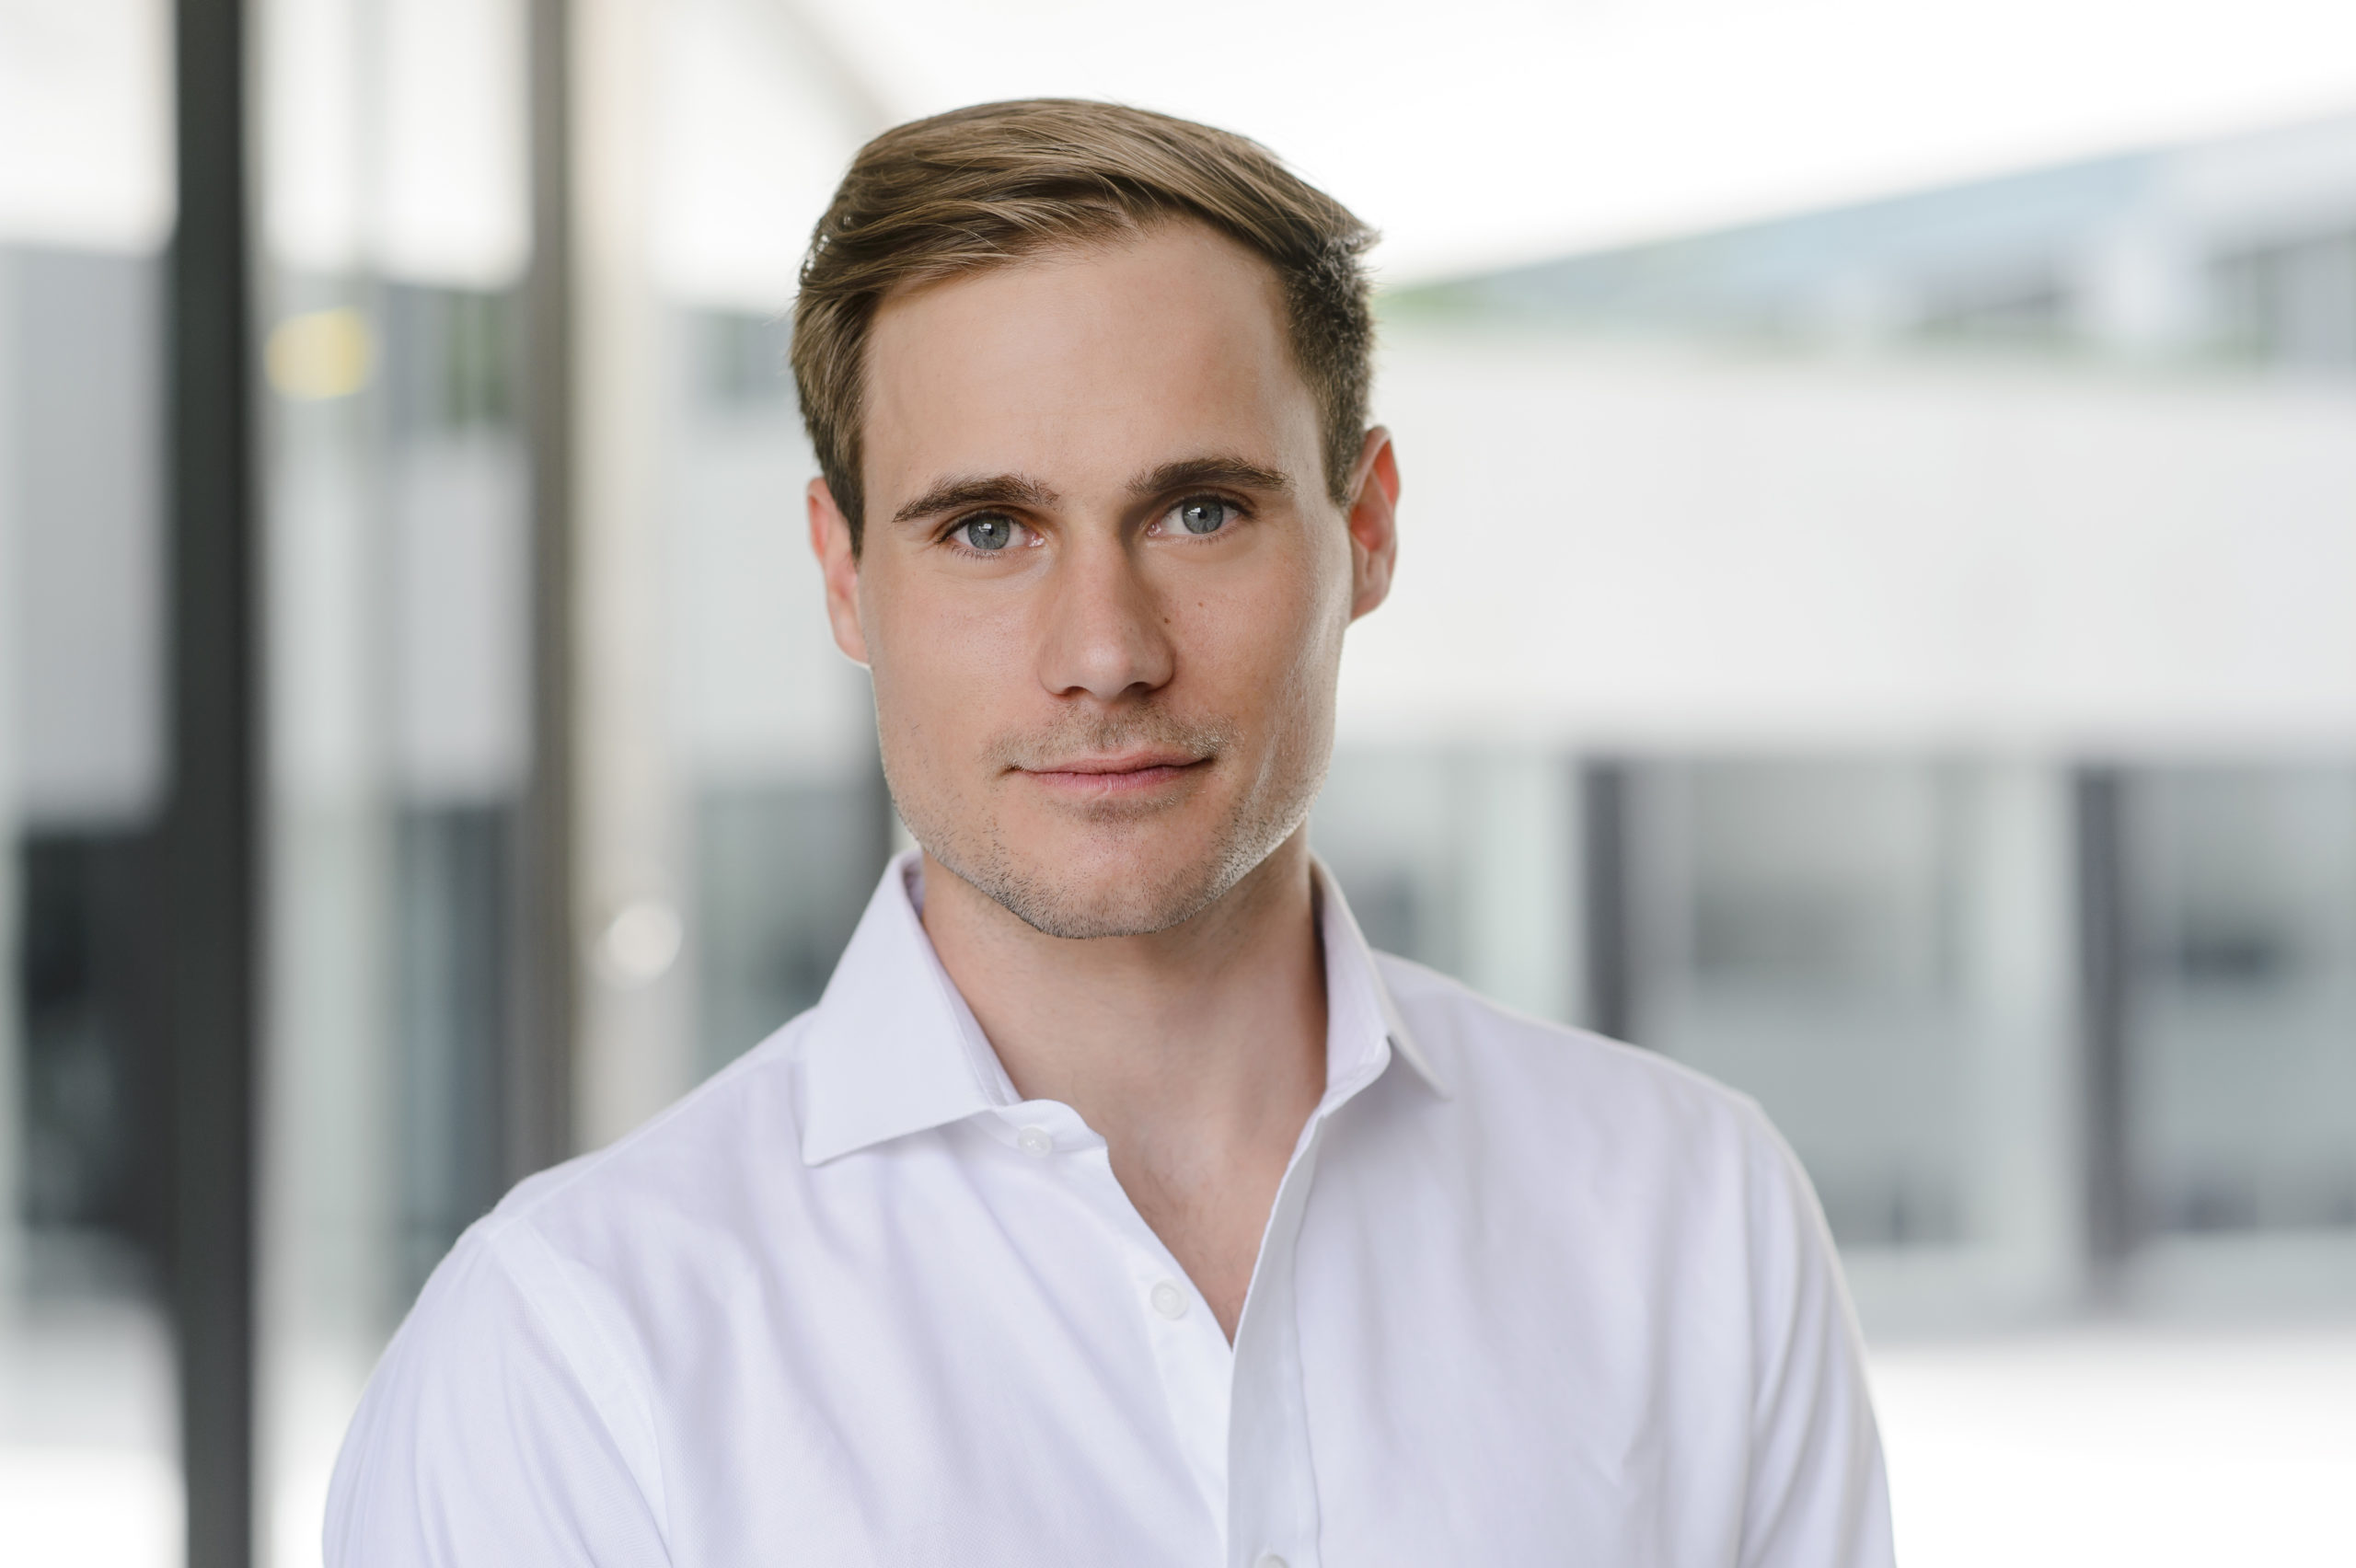 German investment firm Picus Capital to focus on Asia in 2021: Q&A with Oliver Heinrich